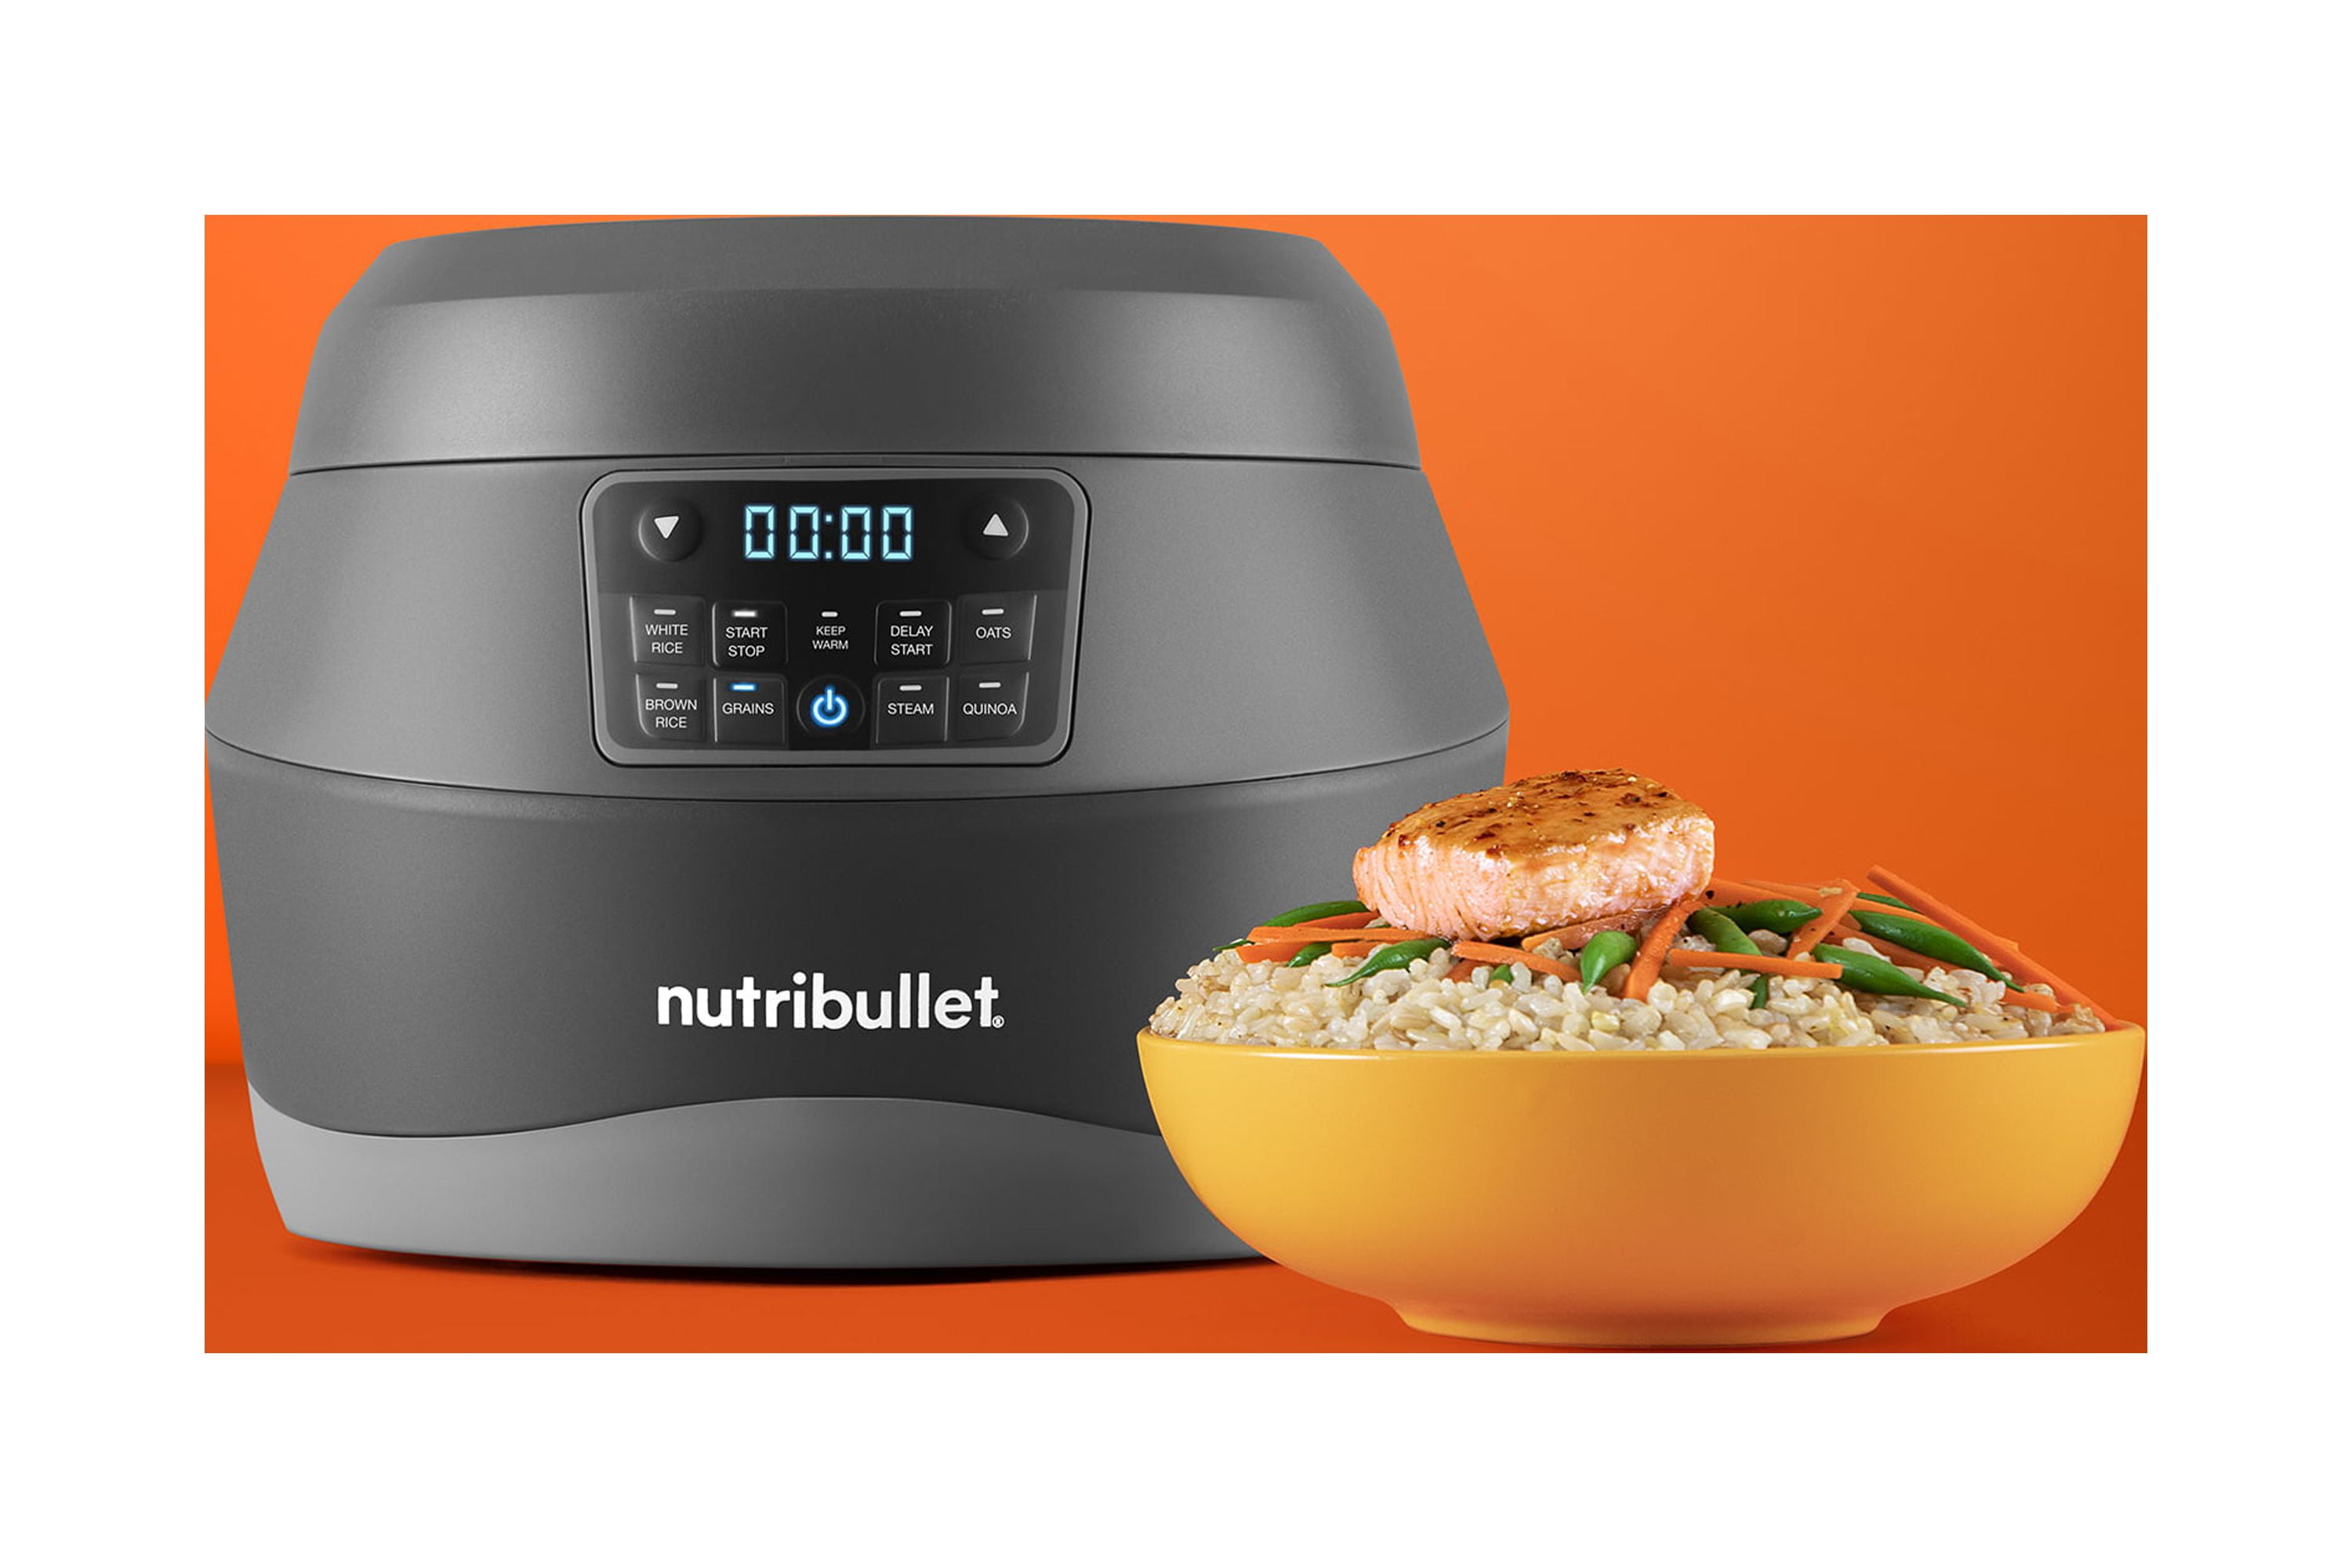 nutribullet® Launches the EveryGrain™ Cooker as the Brand's First